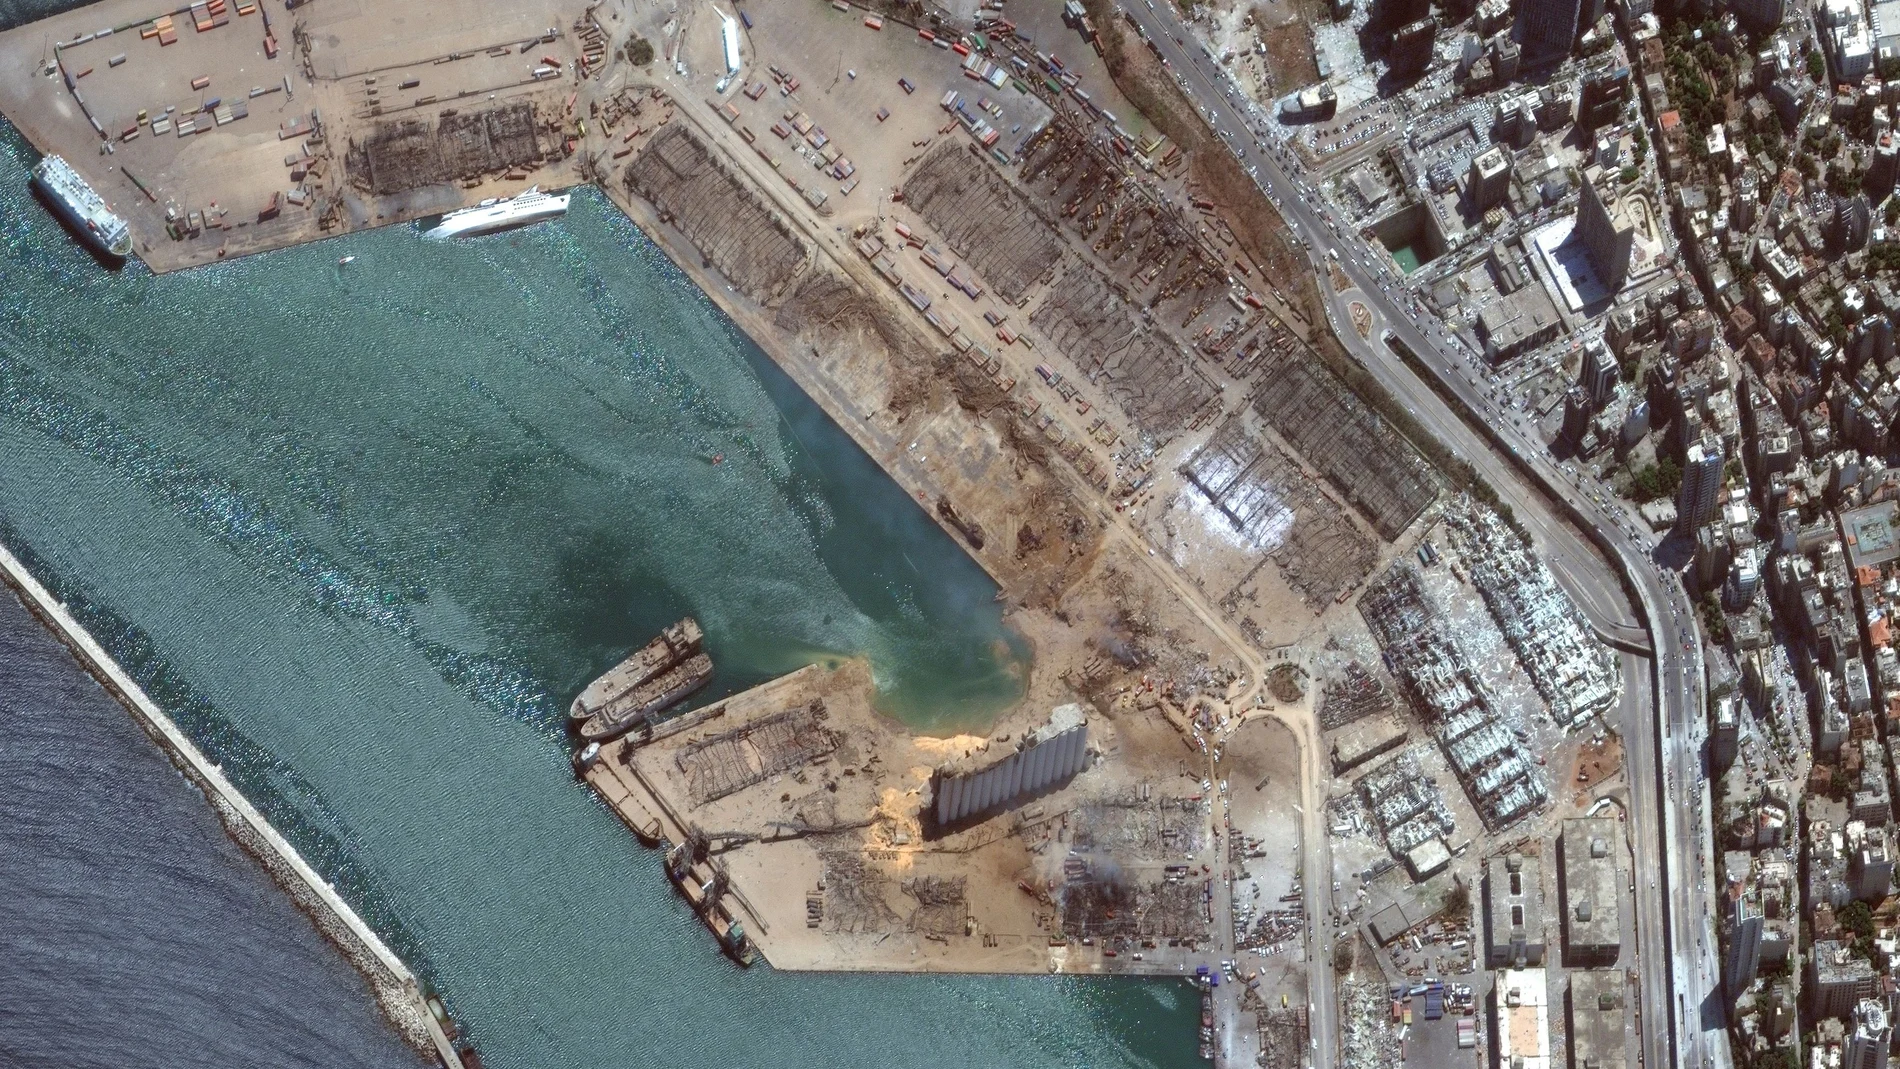 A satellite image shows the port of Beirut after an explosion